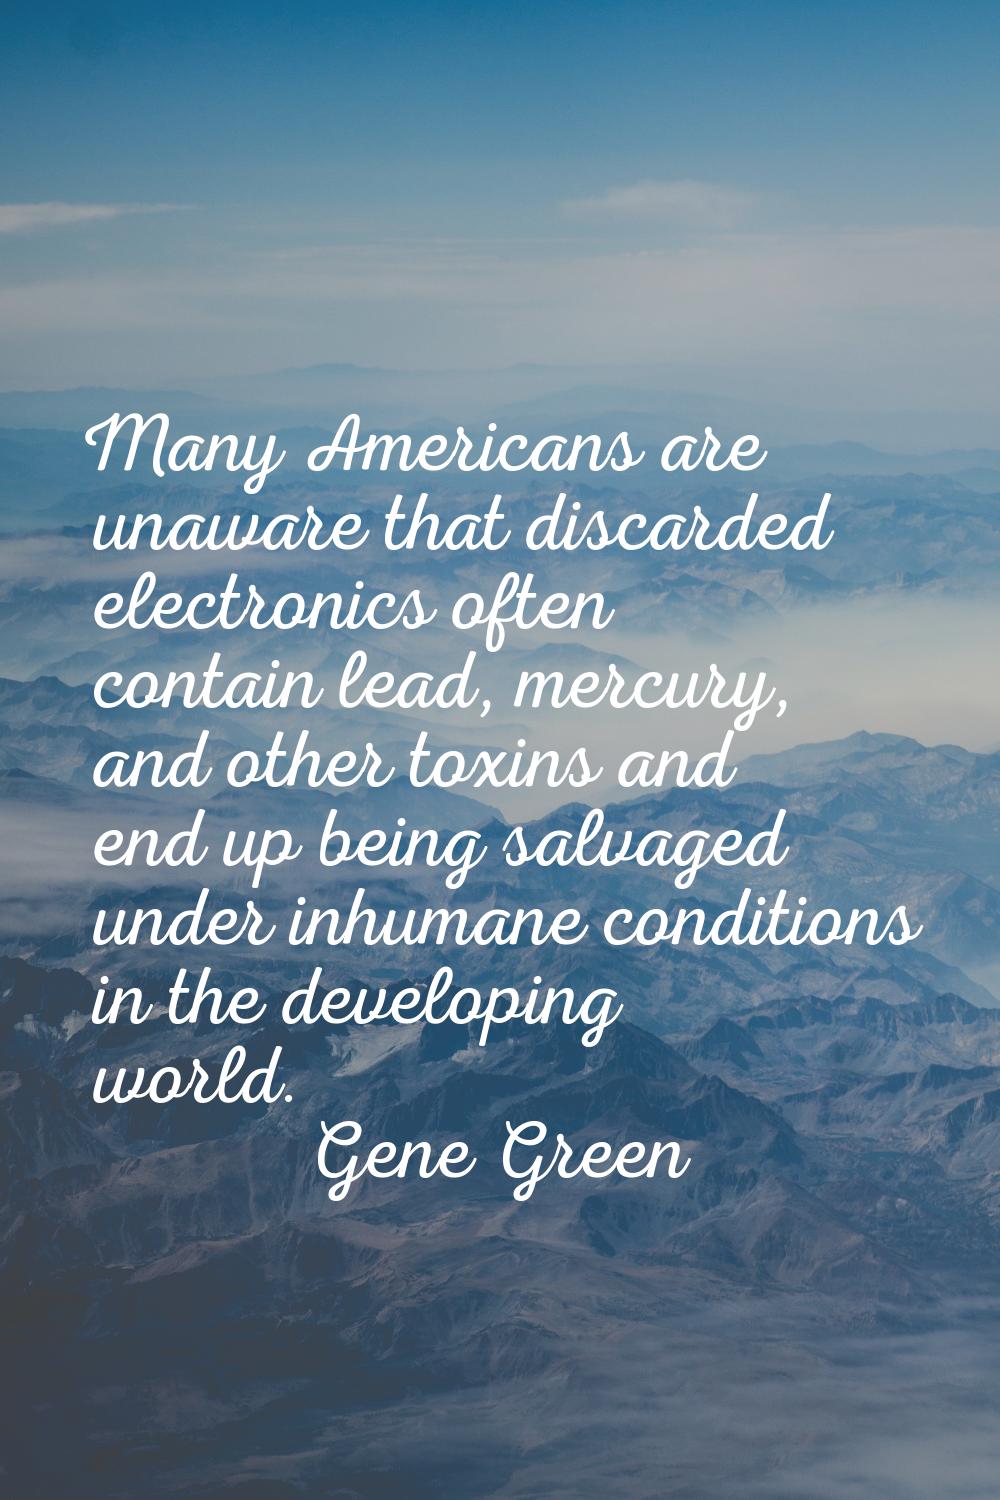 Many Americans are unaware that discarded electronics often contain lead, mercury, and other toxins